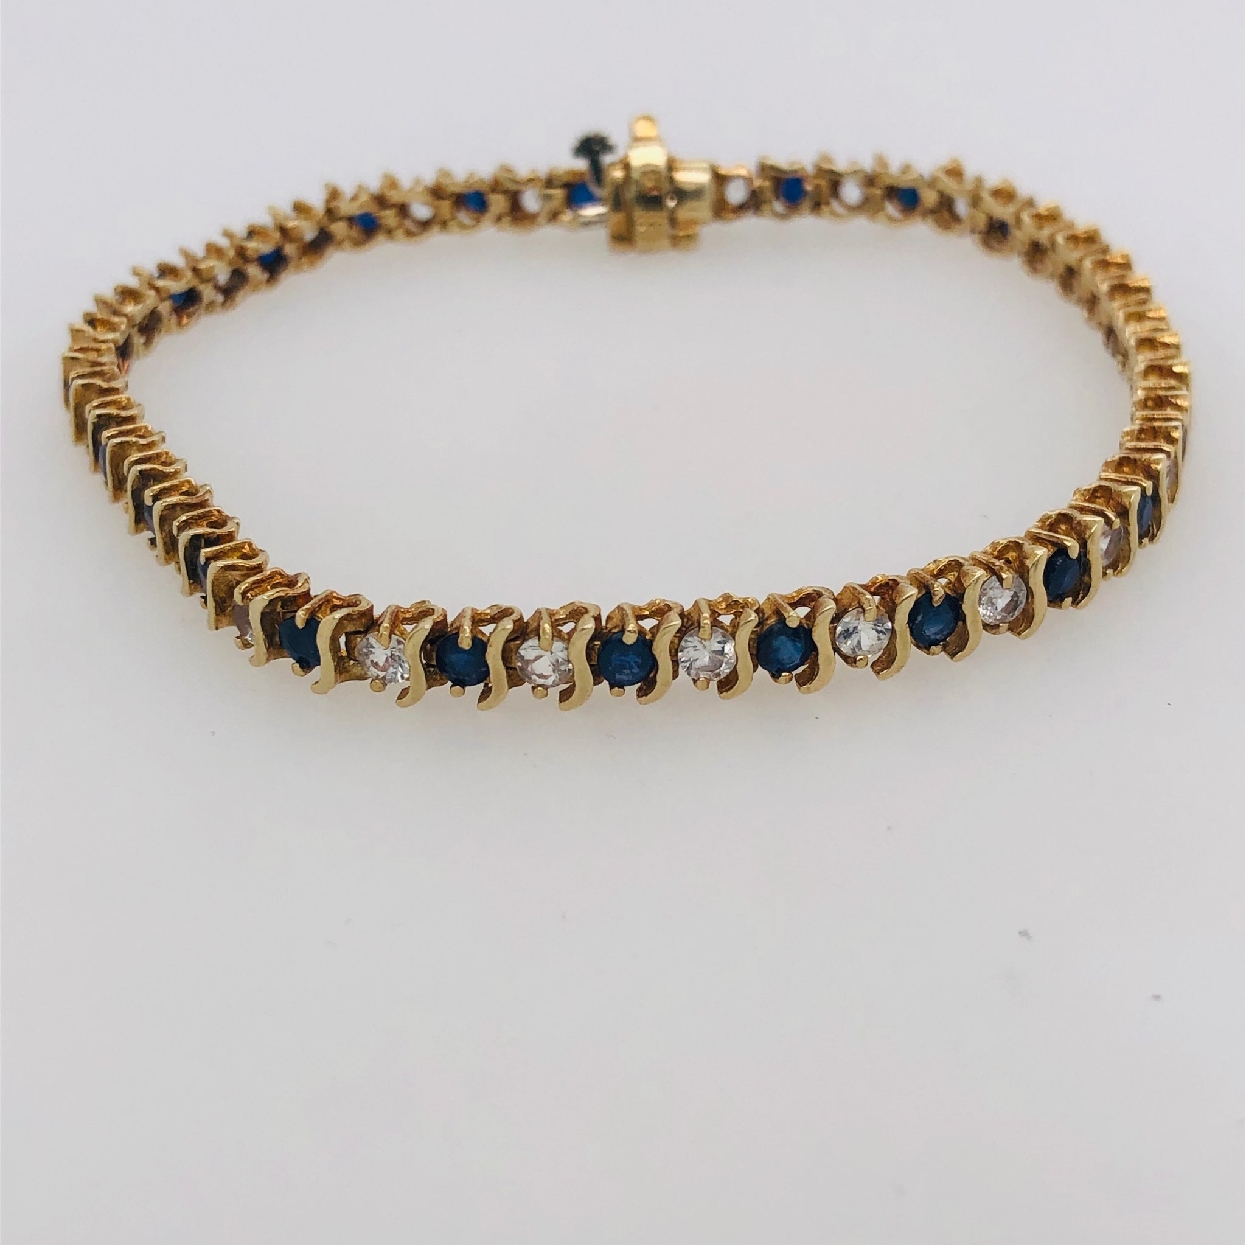 10K Yellow Gold with Sapphire and White Stone Bracelet 7 inches